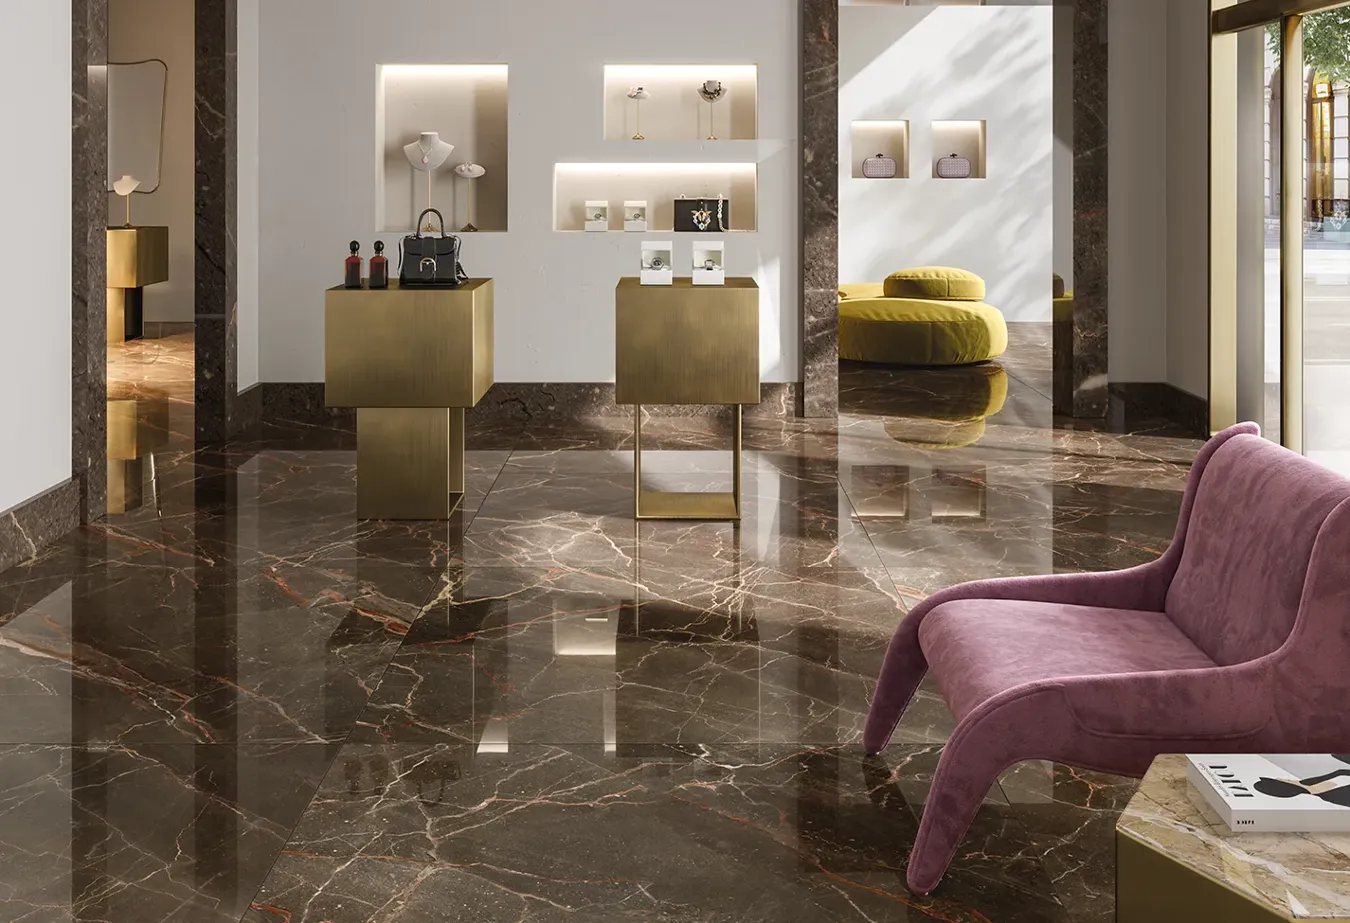 Sophisticated Ombra Moca marble-effect porcelain stoneware flooring from the 9cento collection, paired with bronze furnishings and pink velvet details.